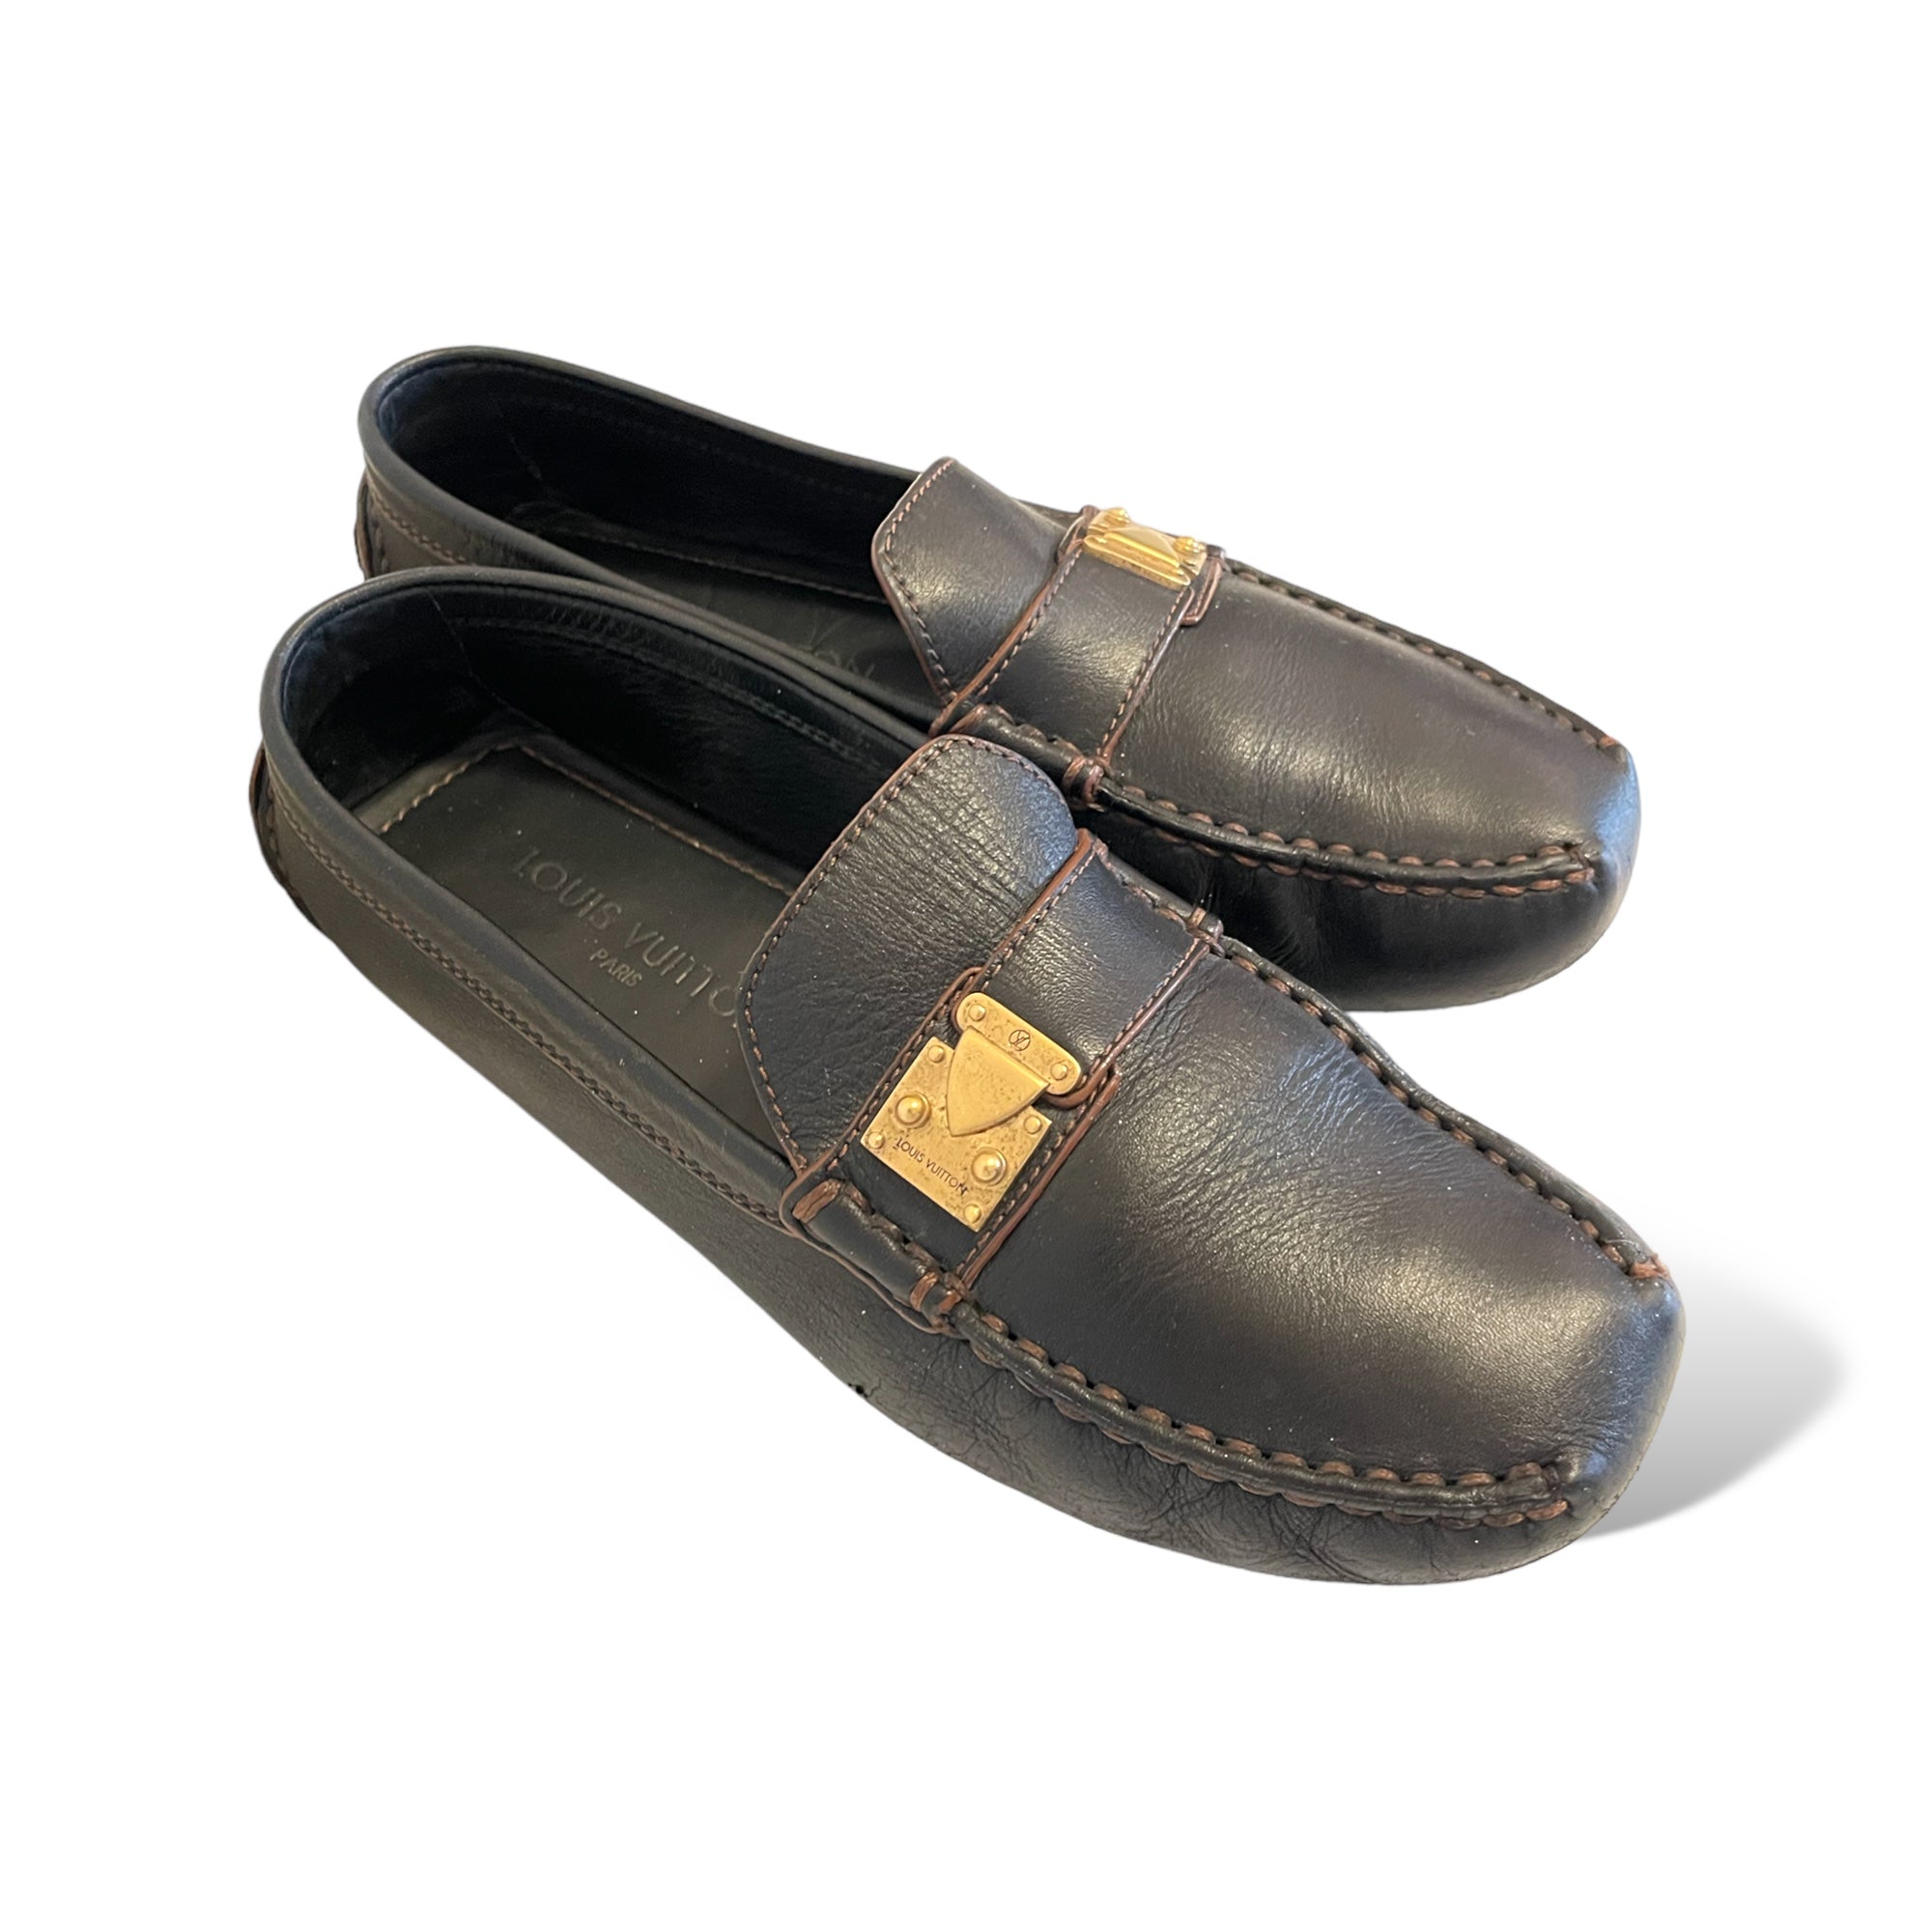 LOUIS VUITTON Vintage Suhali Leather Loafers |Size: 37.5|